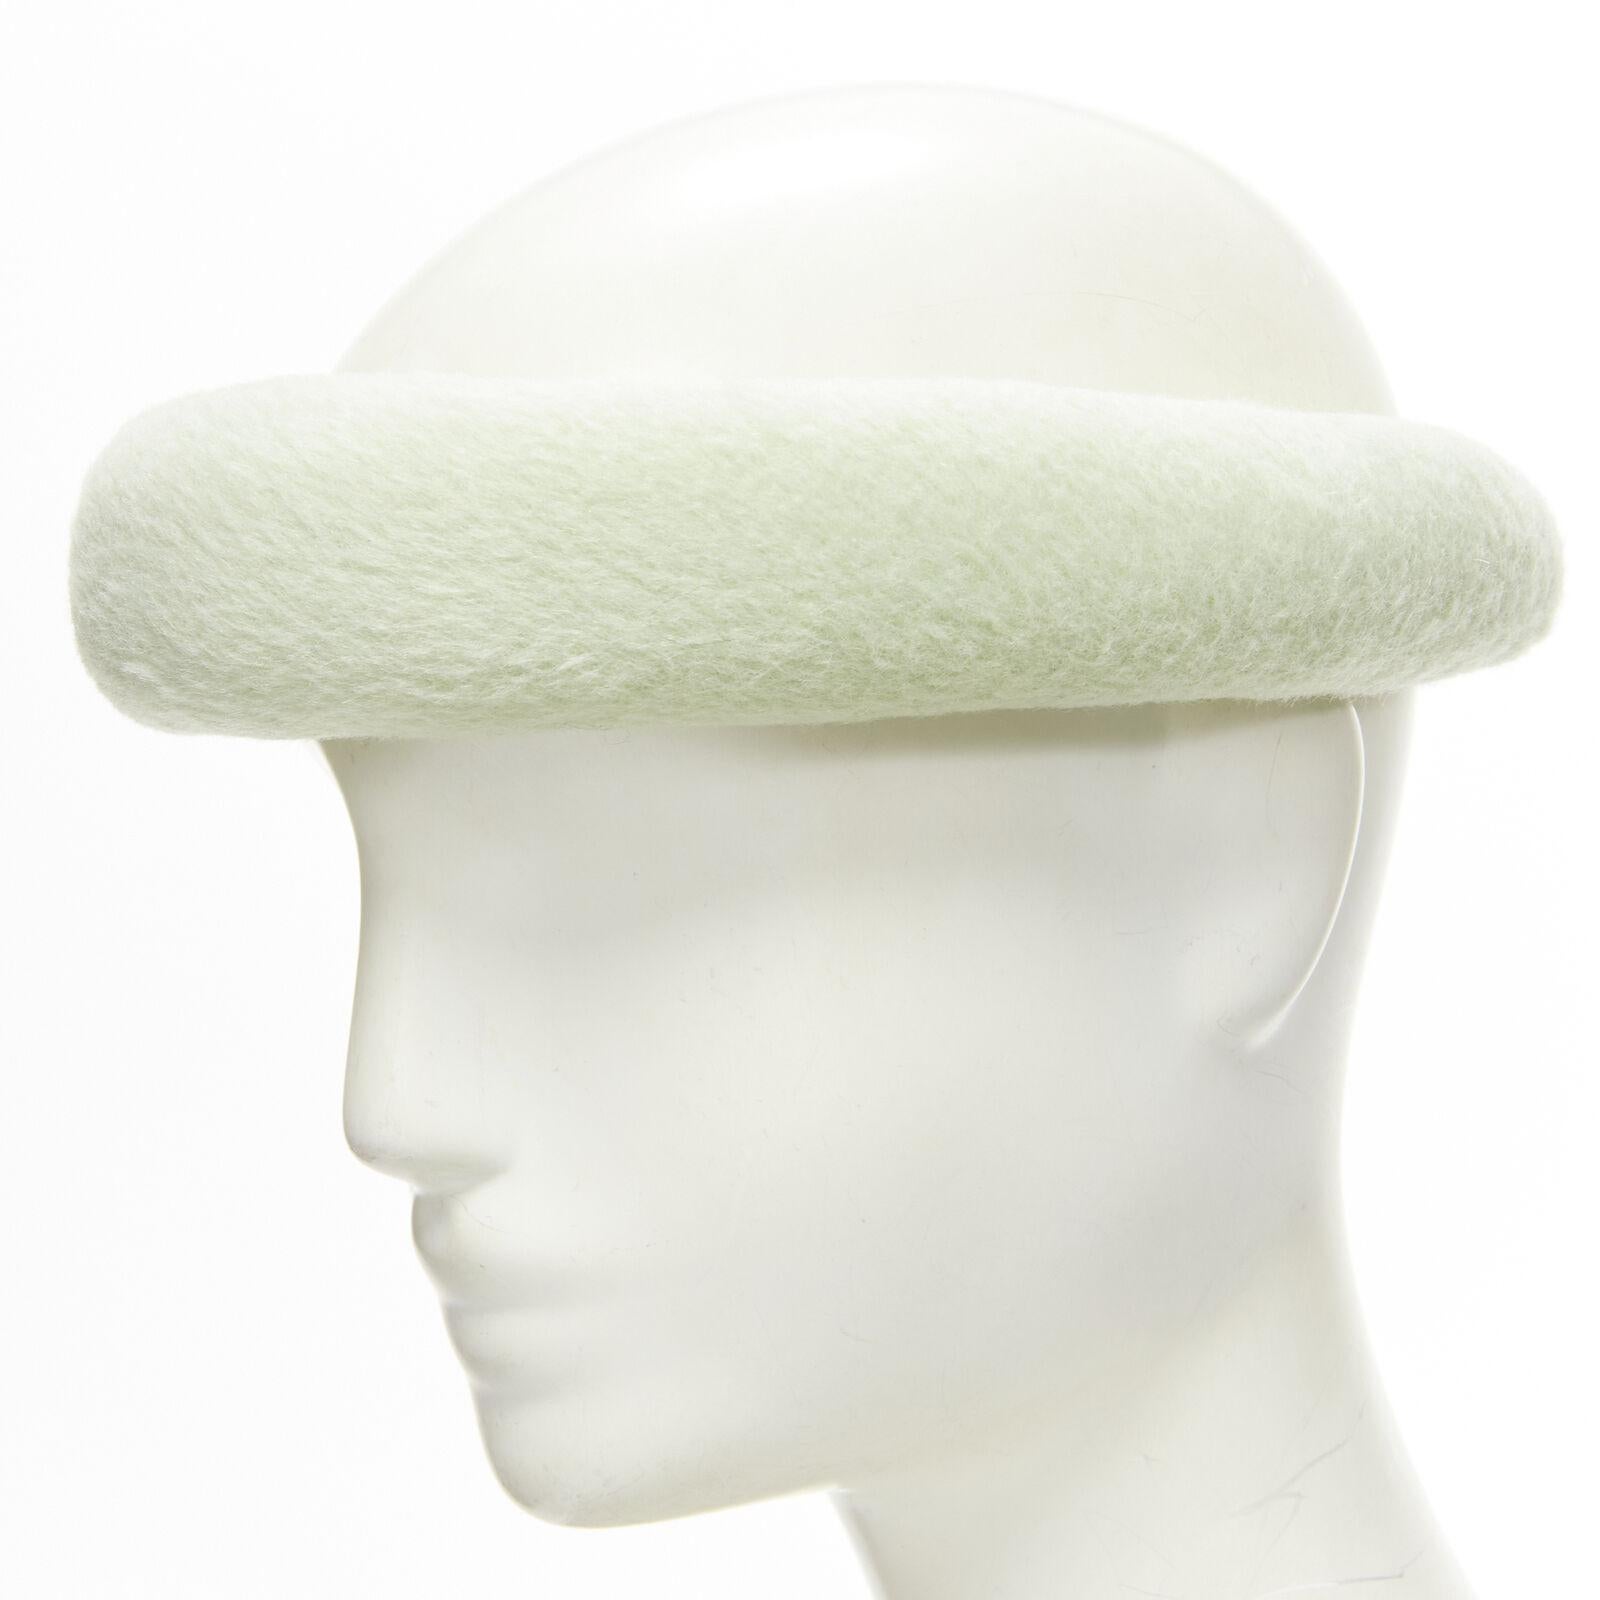 rare MARC JACOBS Stephen Jones 2008 light green wool funky padded headband
Reference: LNKO/A02070
Brand: Marc Jacobs
Collection: Stephen Jones collaboration
Material: Wool
Color: Green
Pattern: Solid
Closure: Pull On
Lining: